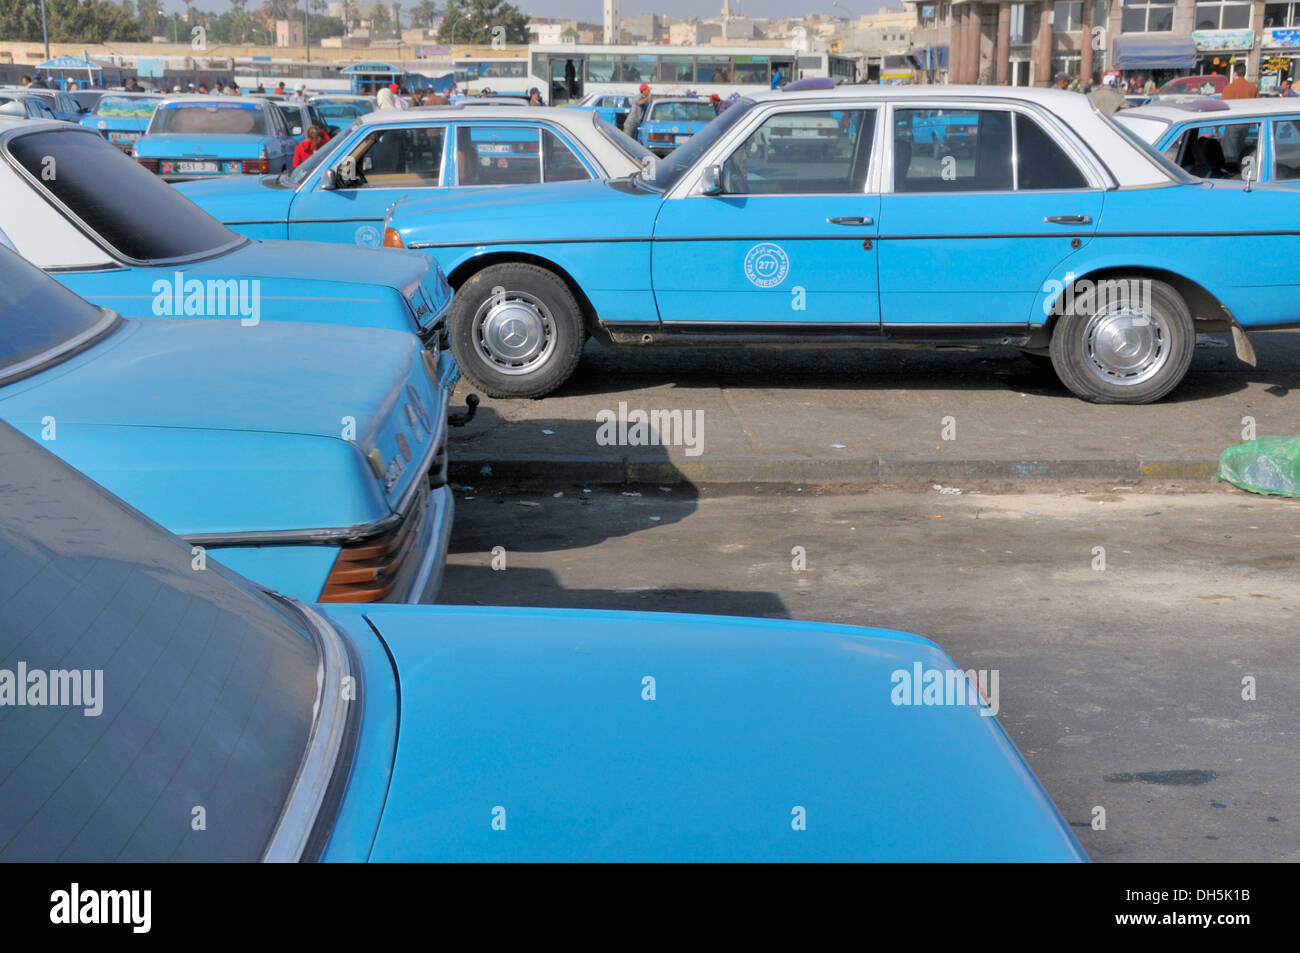 Taxi rank with Grand Taxis in Inezgane, a major transportation hub south of Agadir, Morocco, Africa Stock Photo